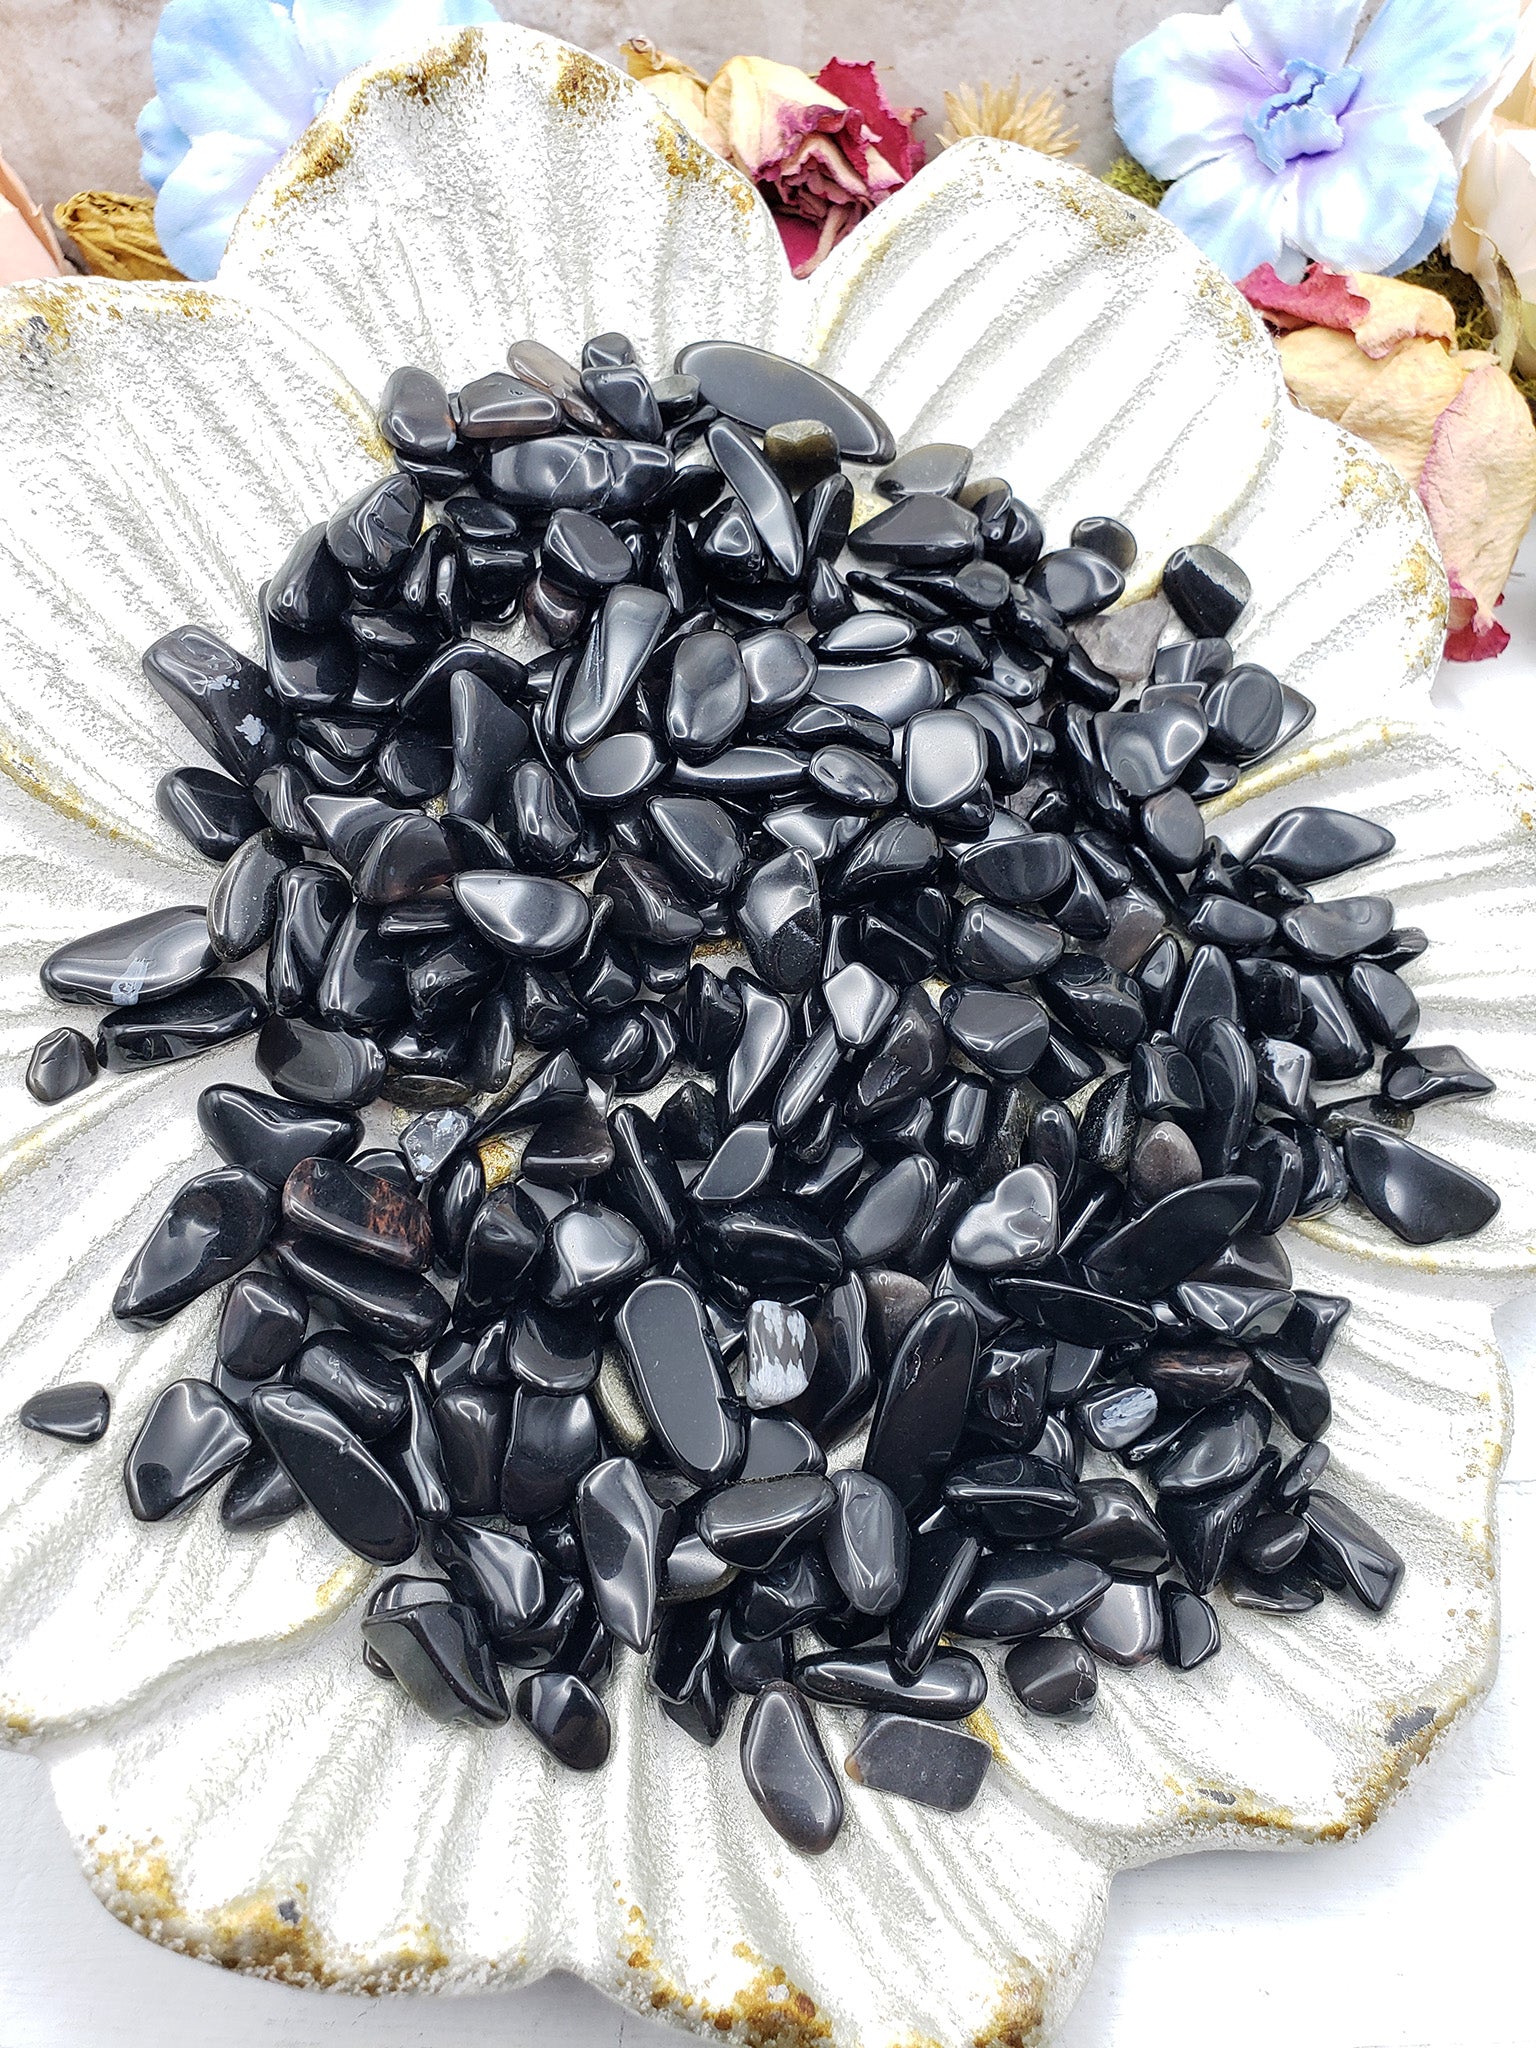 Seven ounces of obsidian stone chips on display